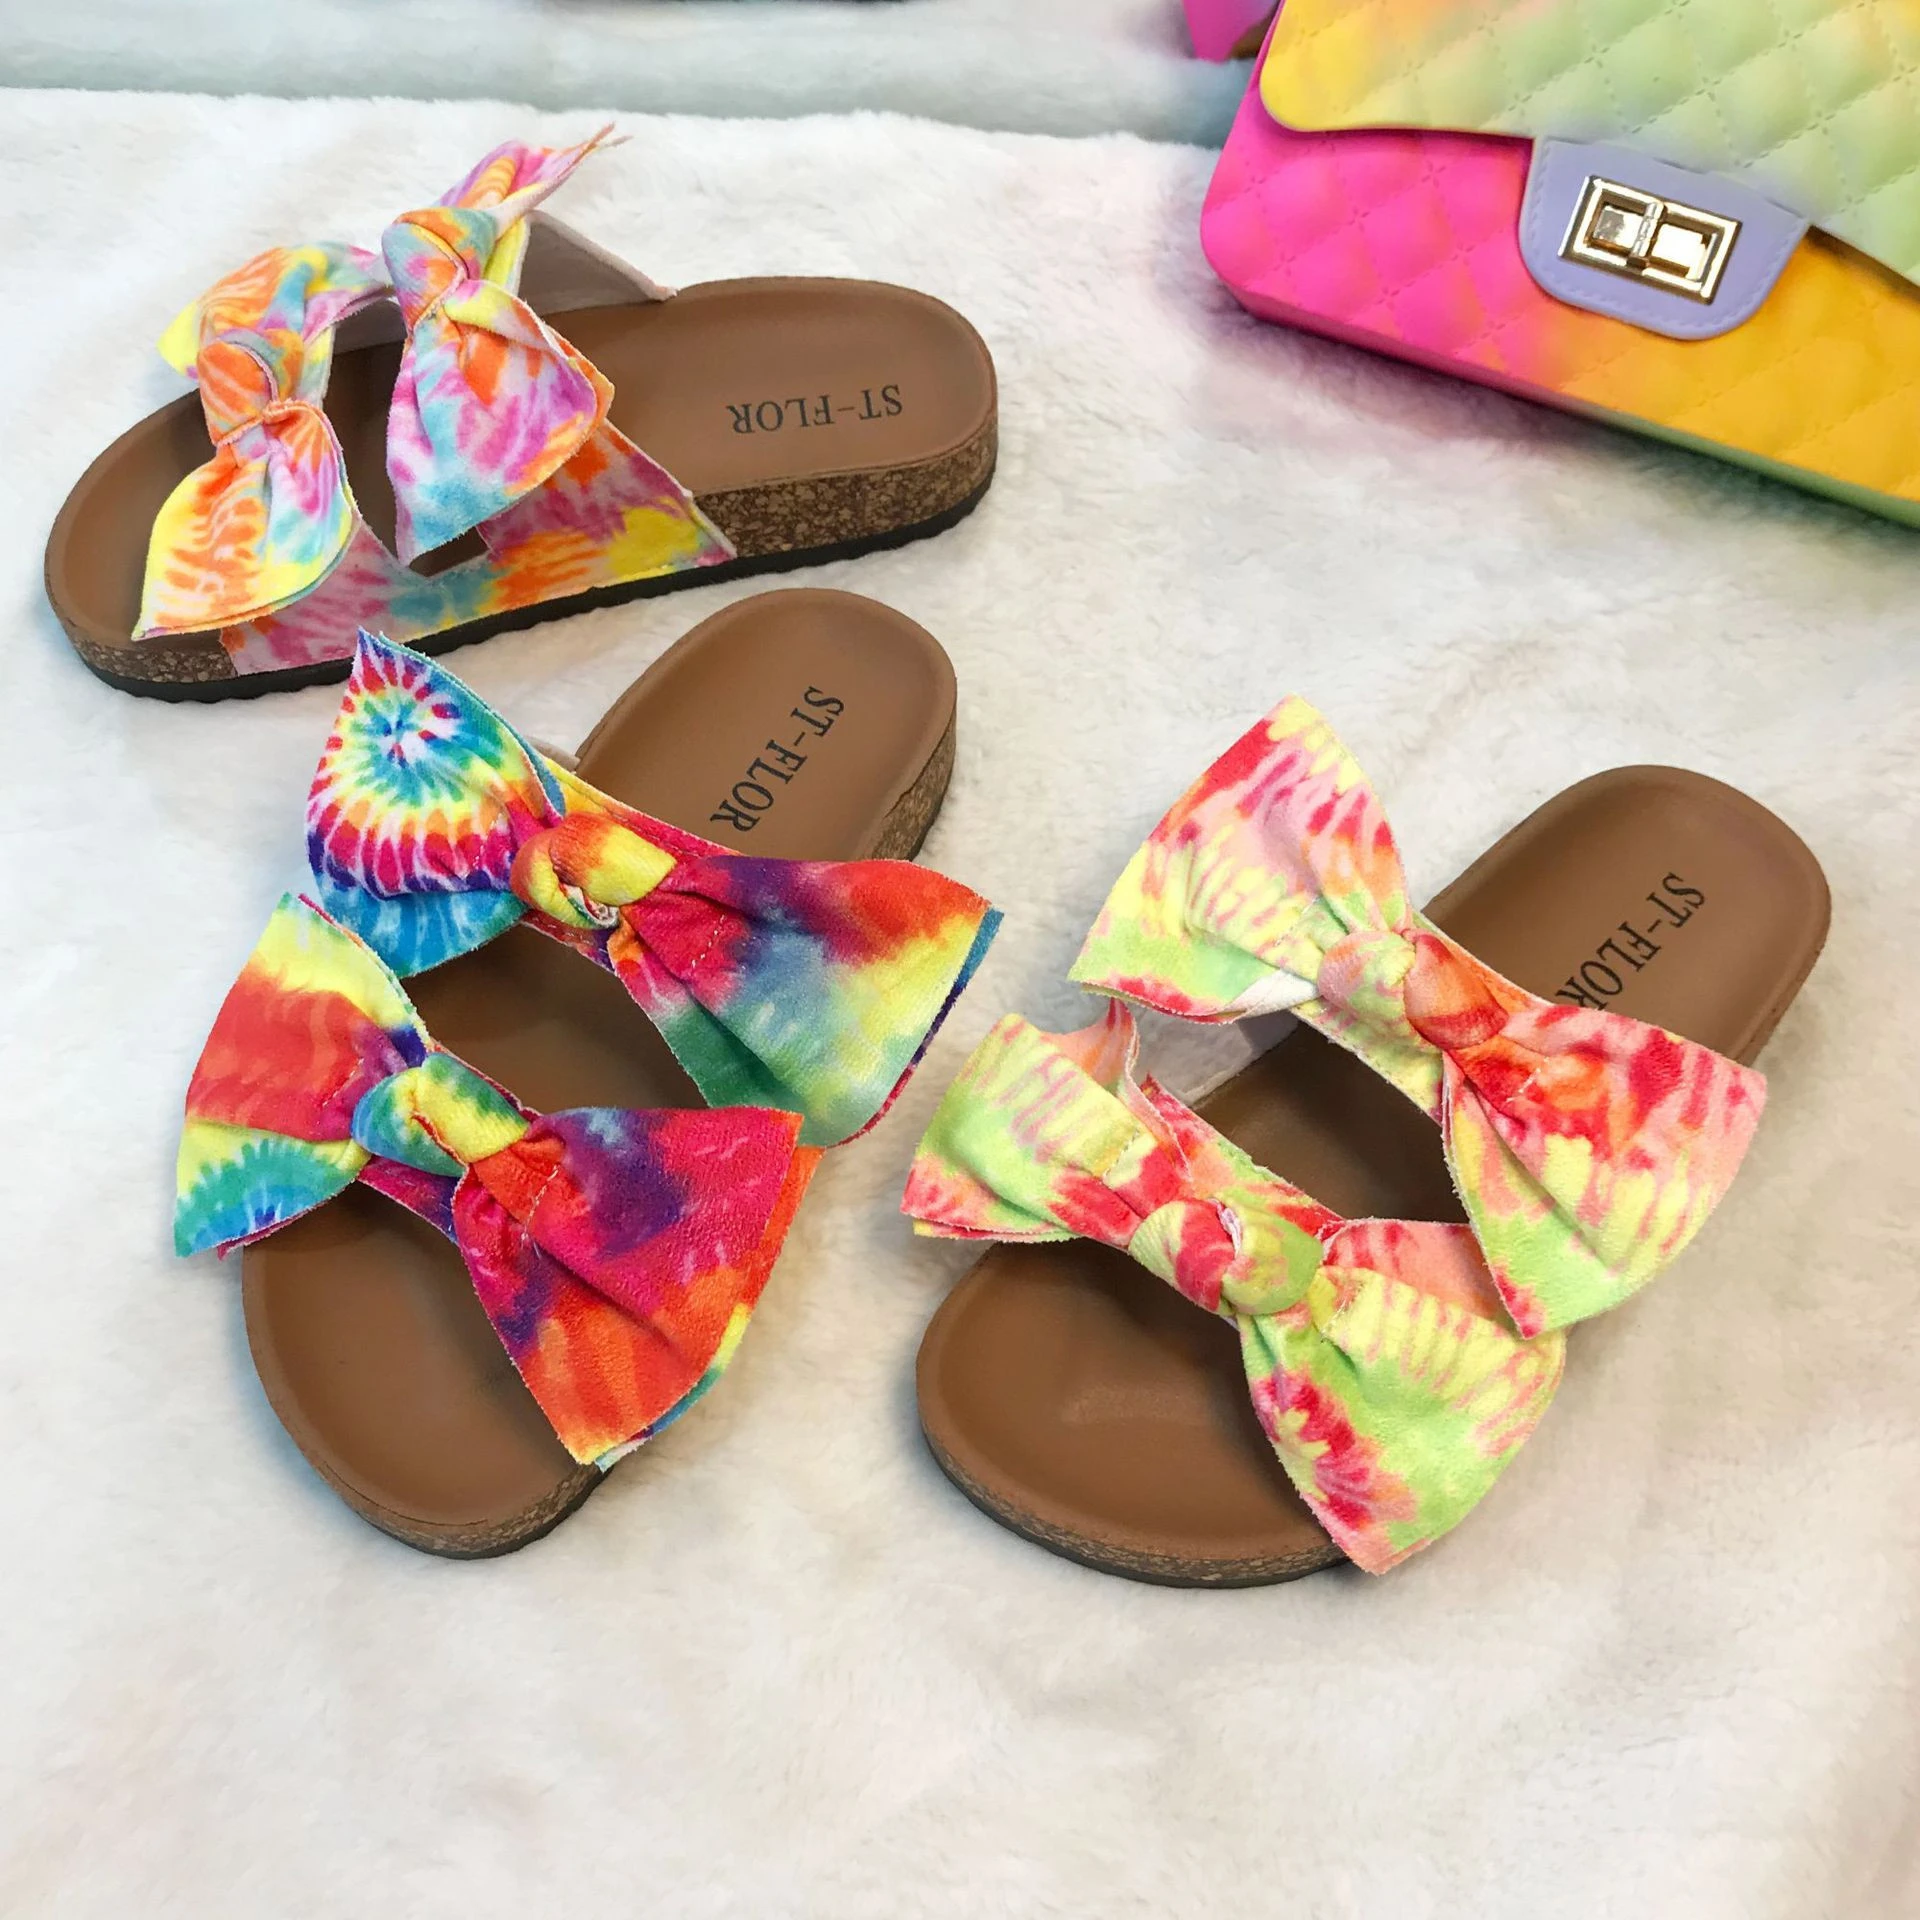 PDEP 2021 Summer Mixed Colors Slippers Tie Dye Sandals Fashion Women Flip Flops Cute Slippers Rainbow Bow Slides for Women